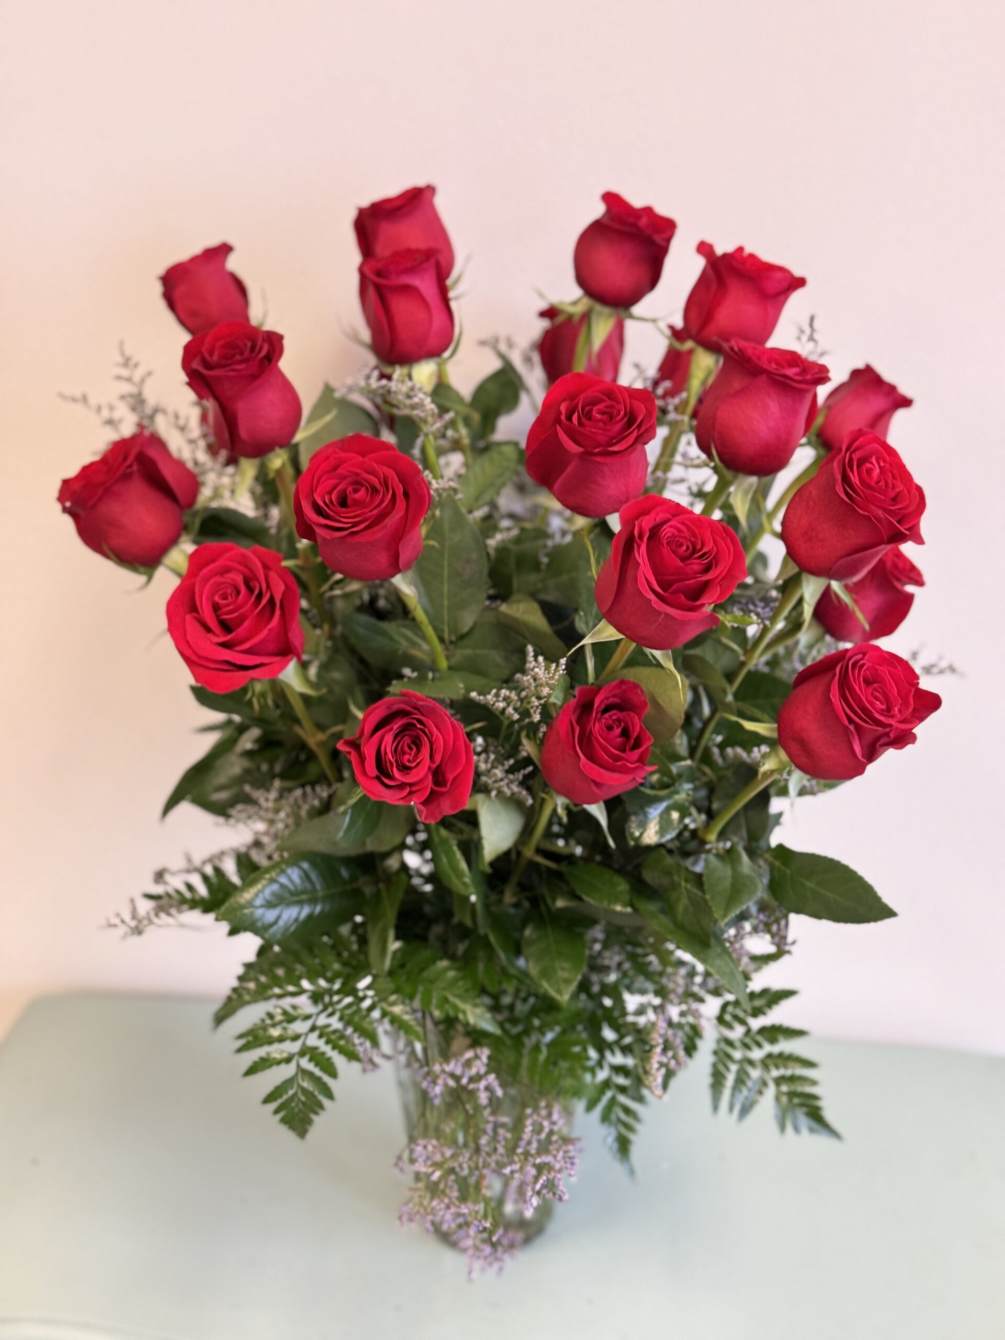 Explore your love with this impressive display of two dozen long stem